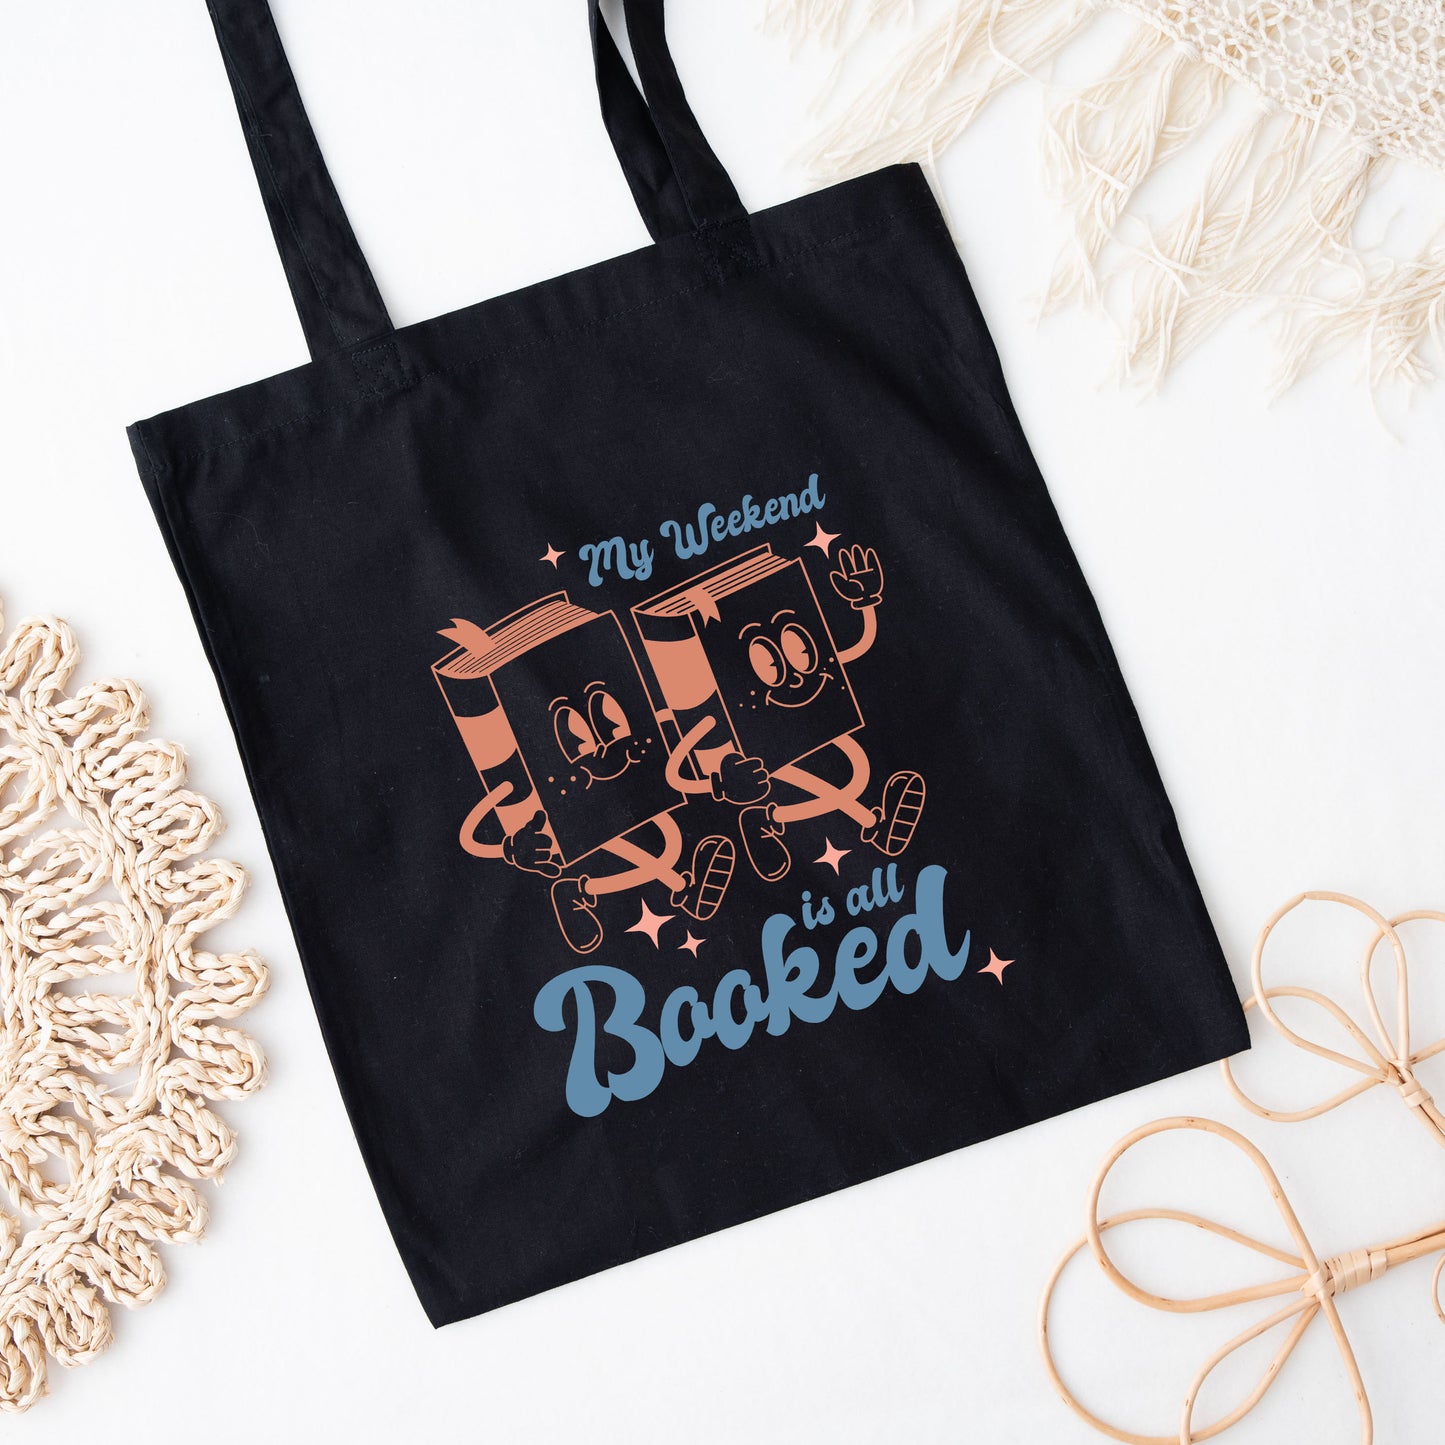 Weekend Is All Booked | Tote Bag